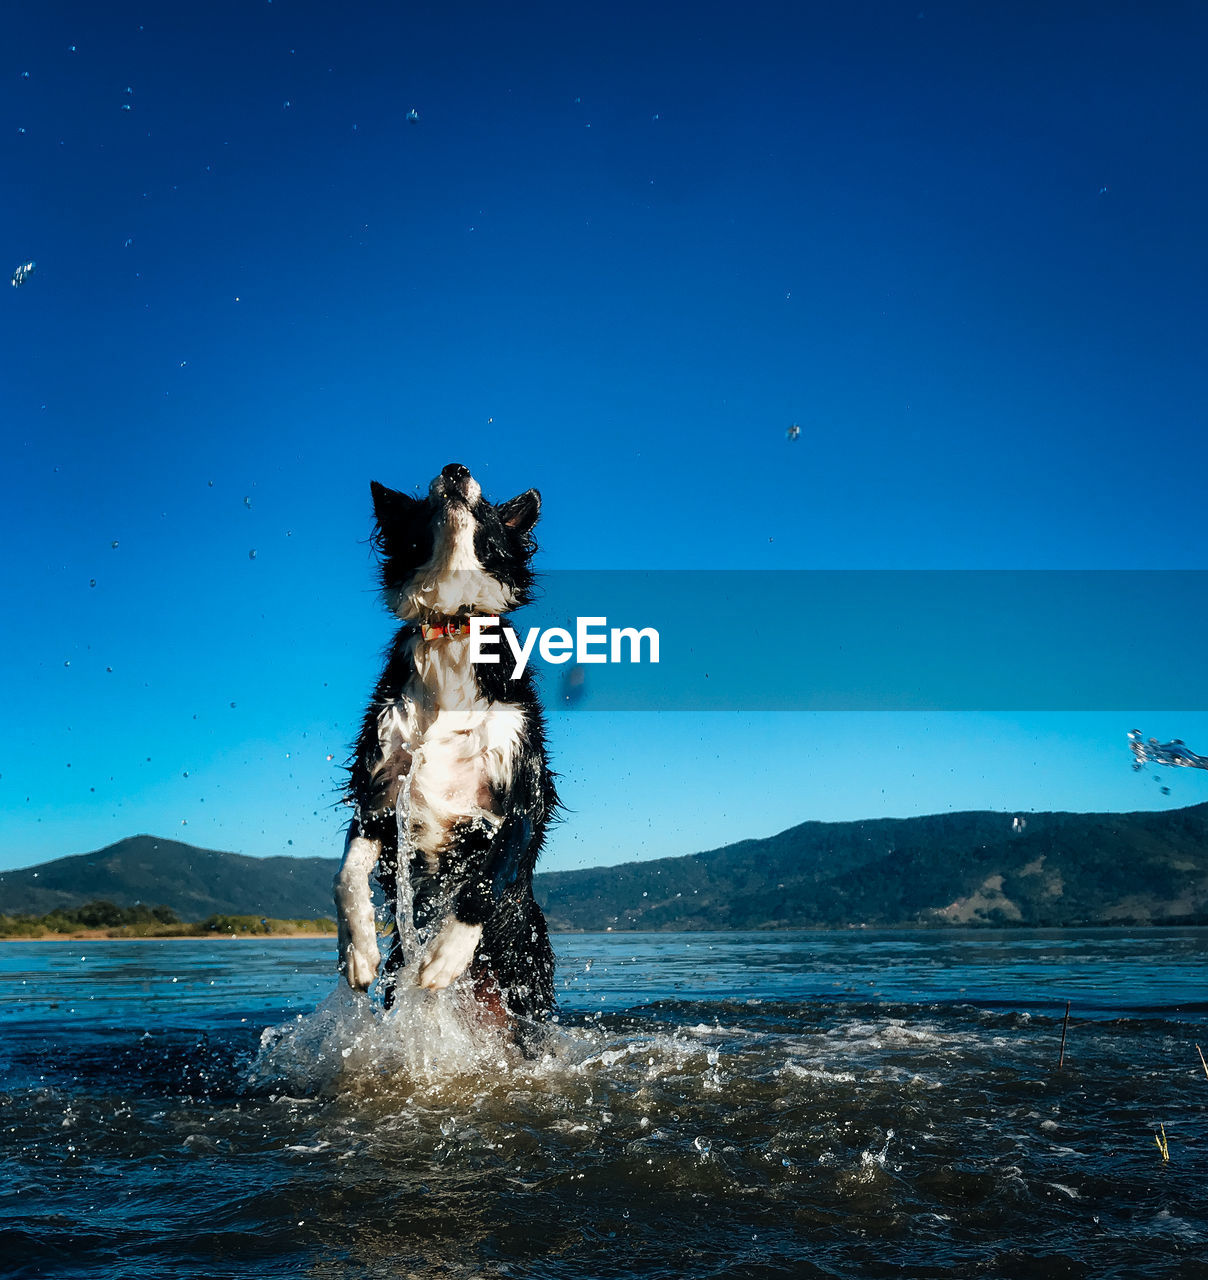 Border collie dog running in sea against blue sky